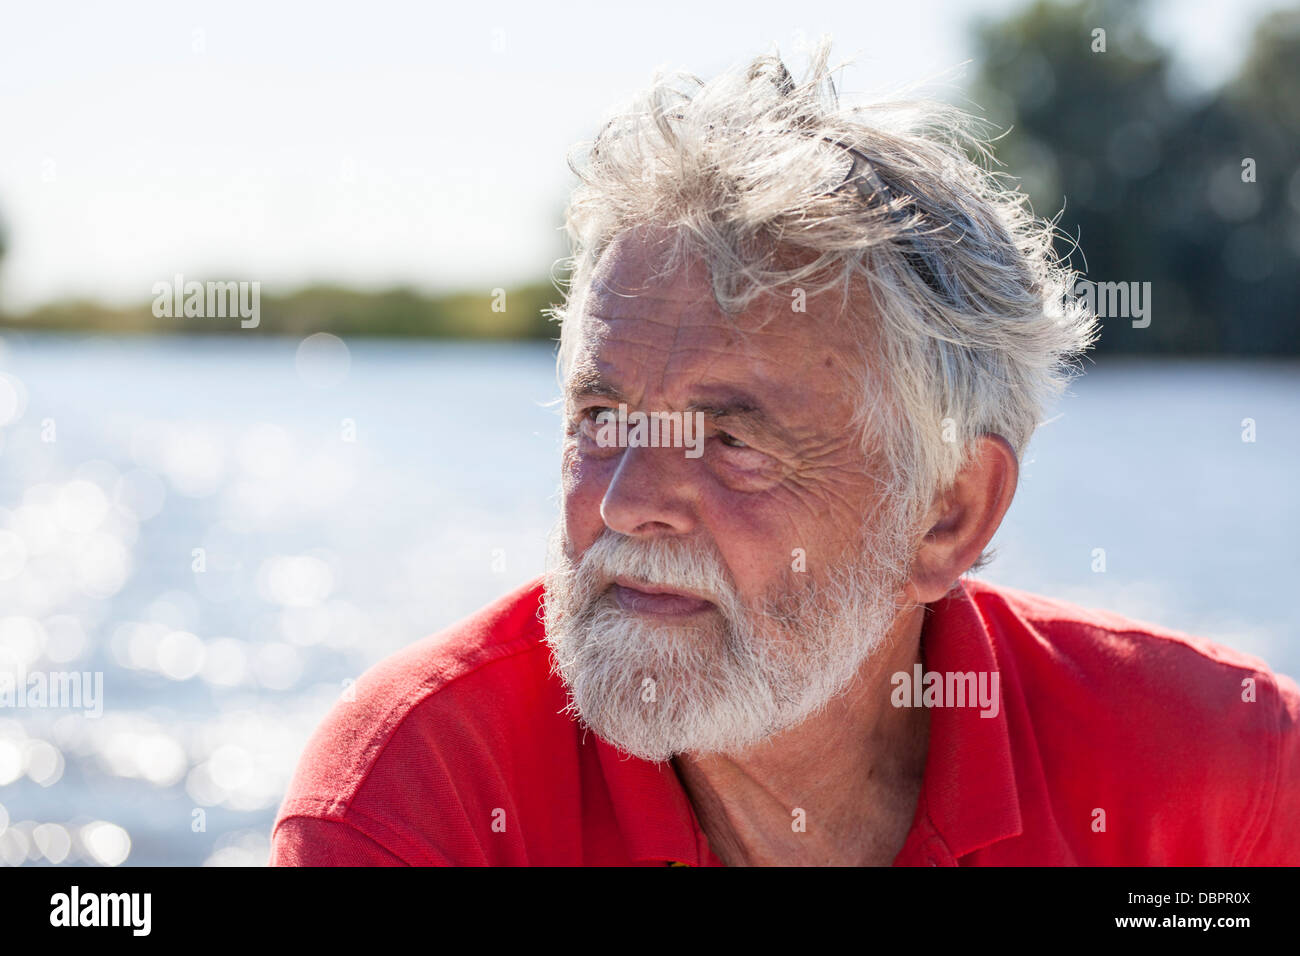 Portrait senior man 60-70 with a beard with water in the background Stock Photo